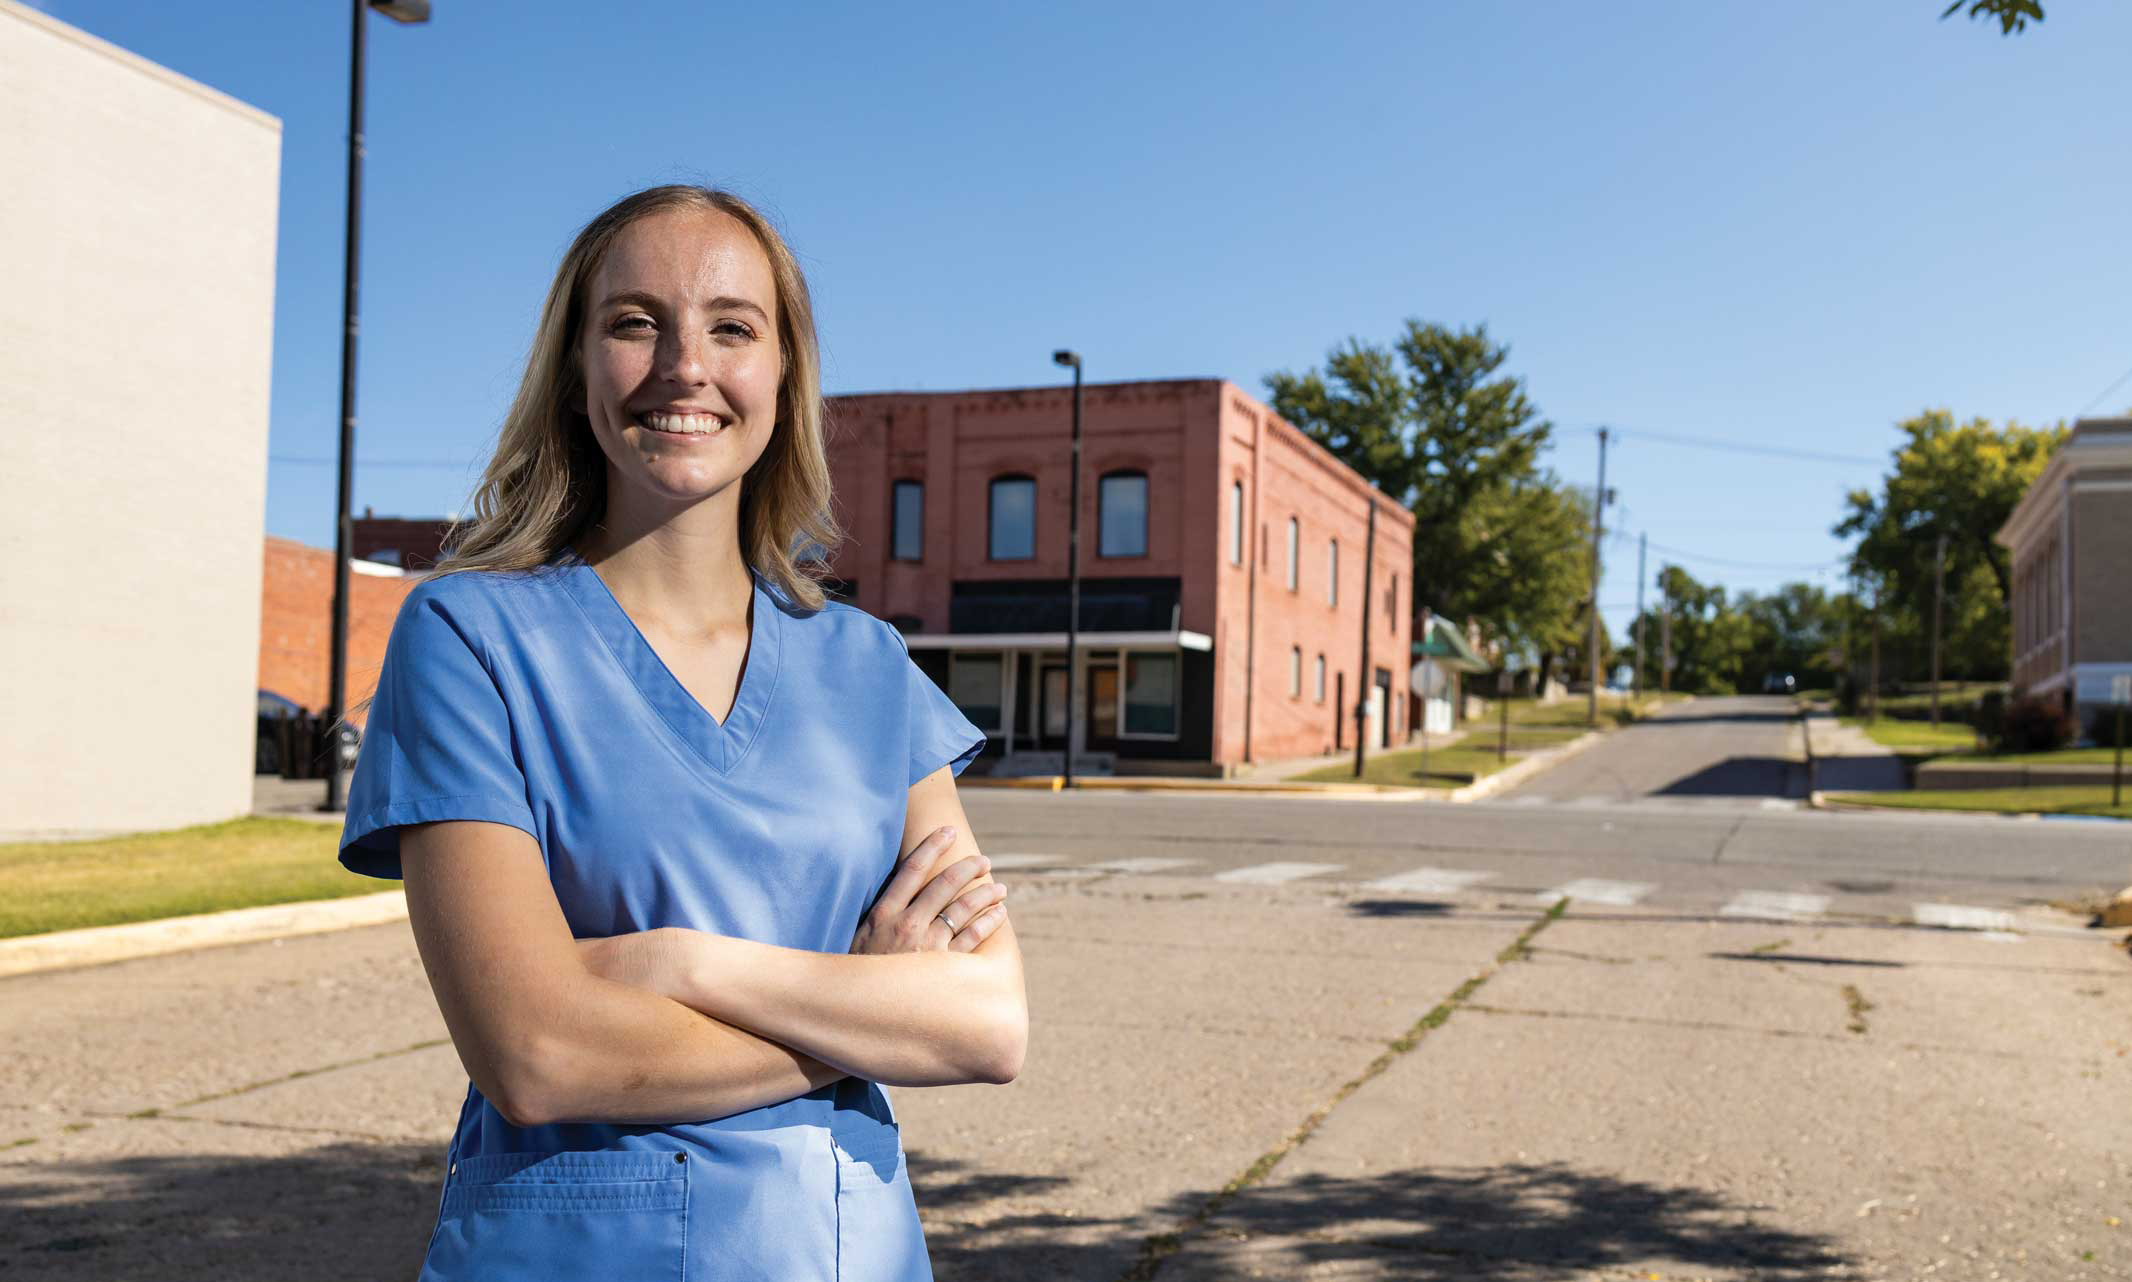 Dental student stands on small town street